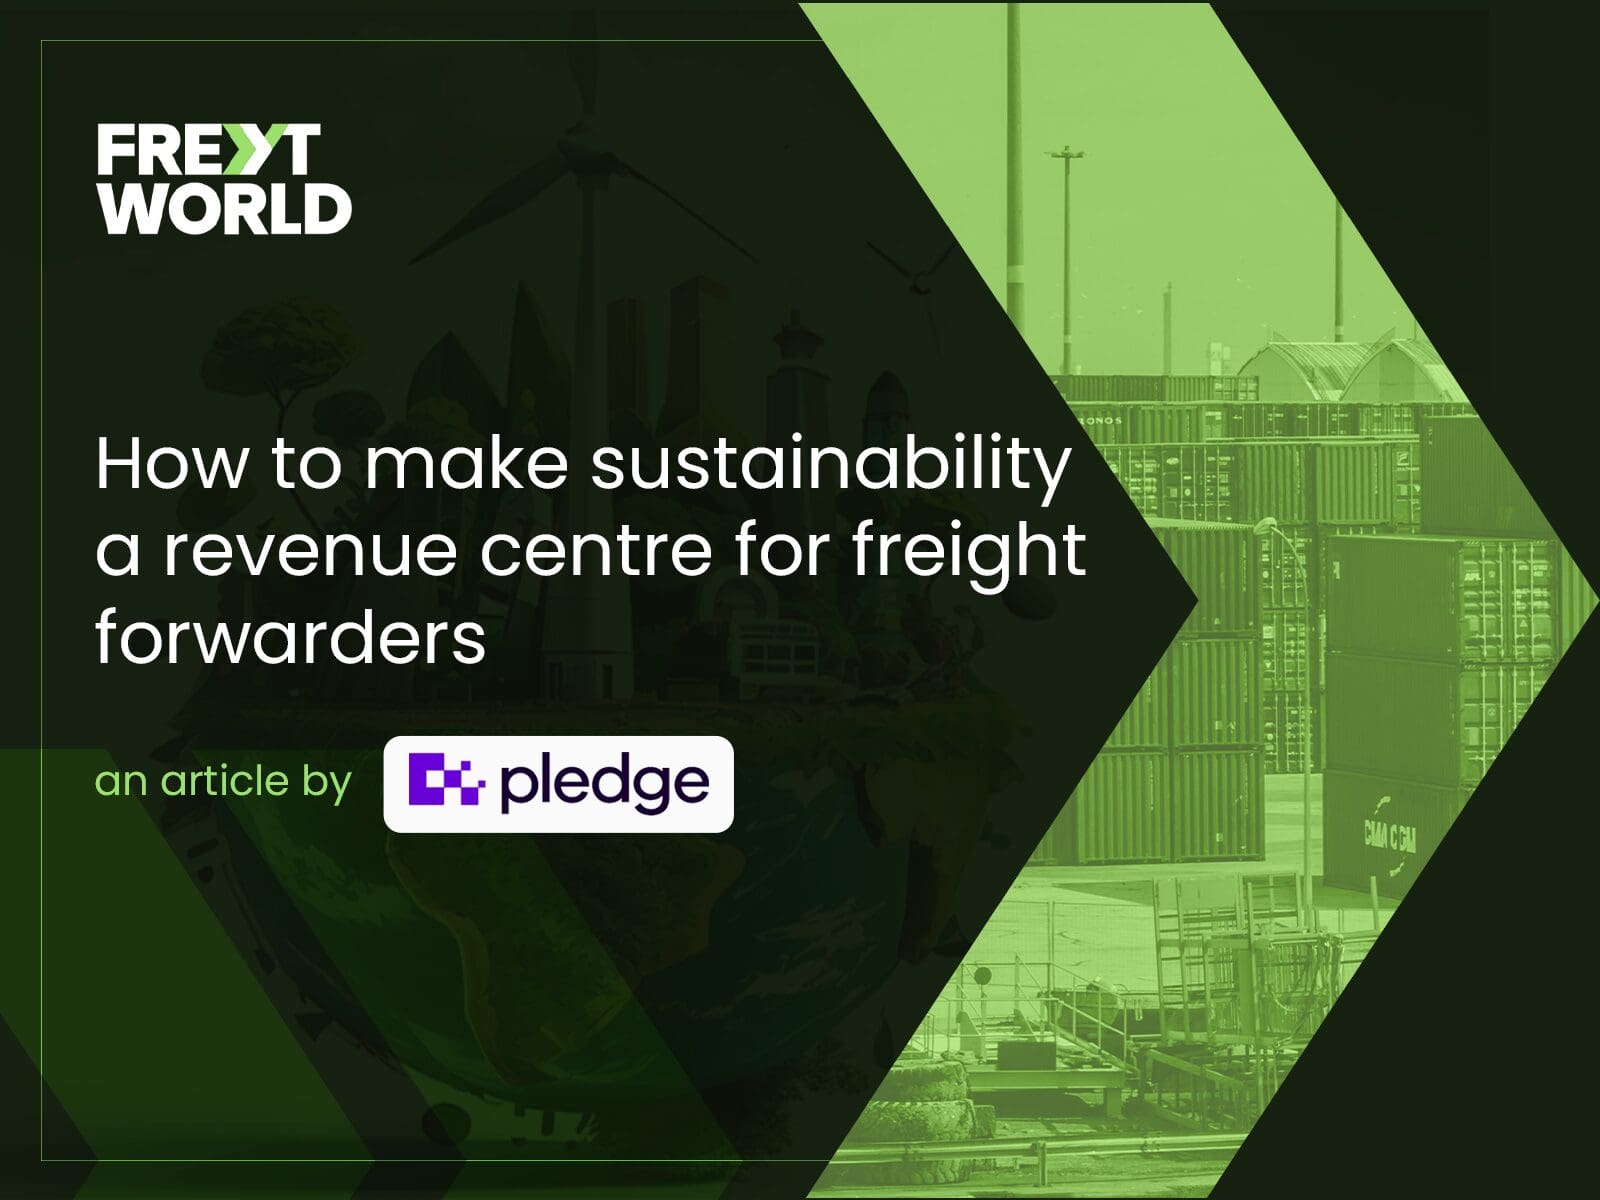 How to make sustainability a revenue centre for freight forwarders